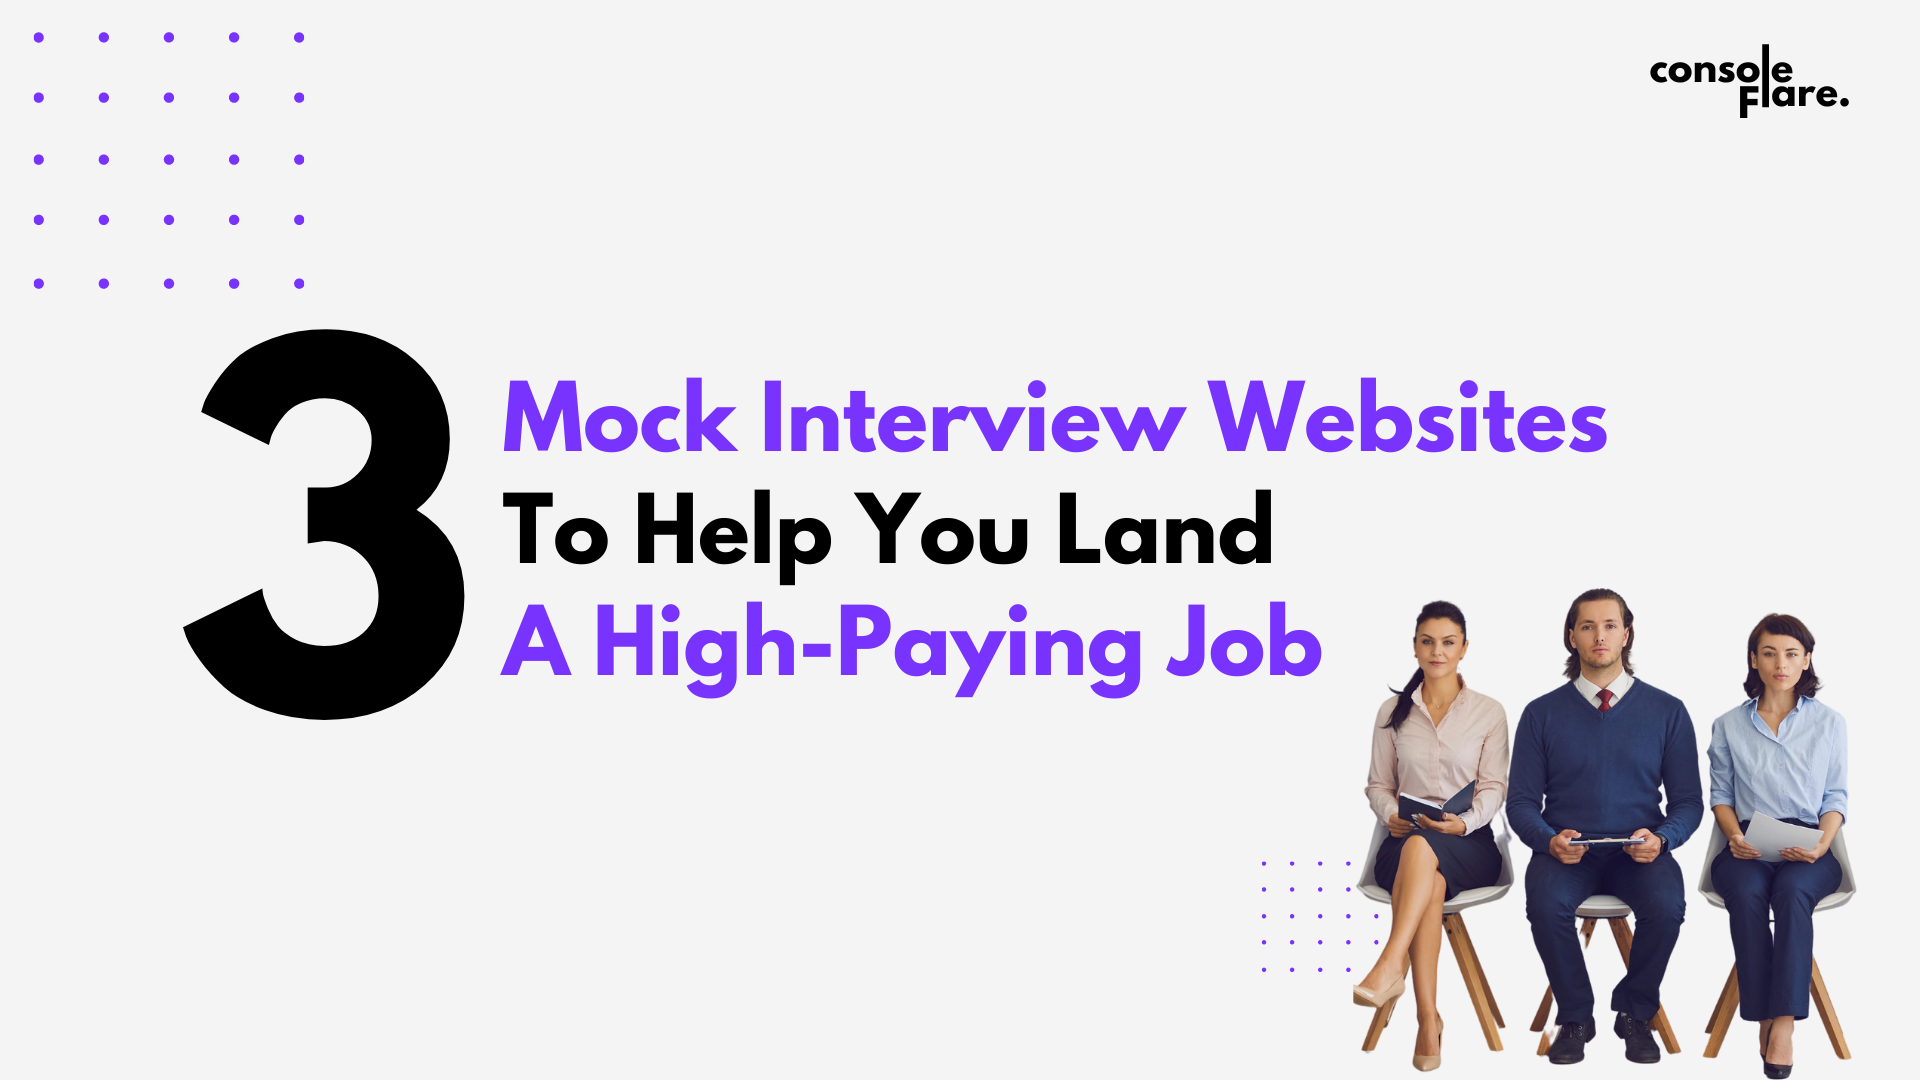 3 Amazing Mock Interview Websites To Help You Land a High-Paying Job